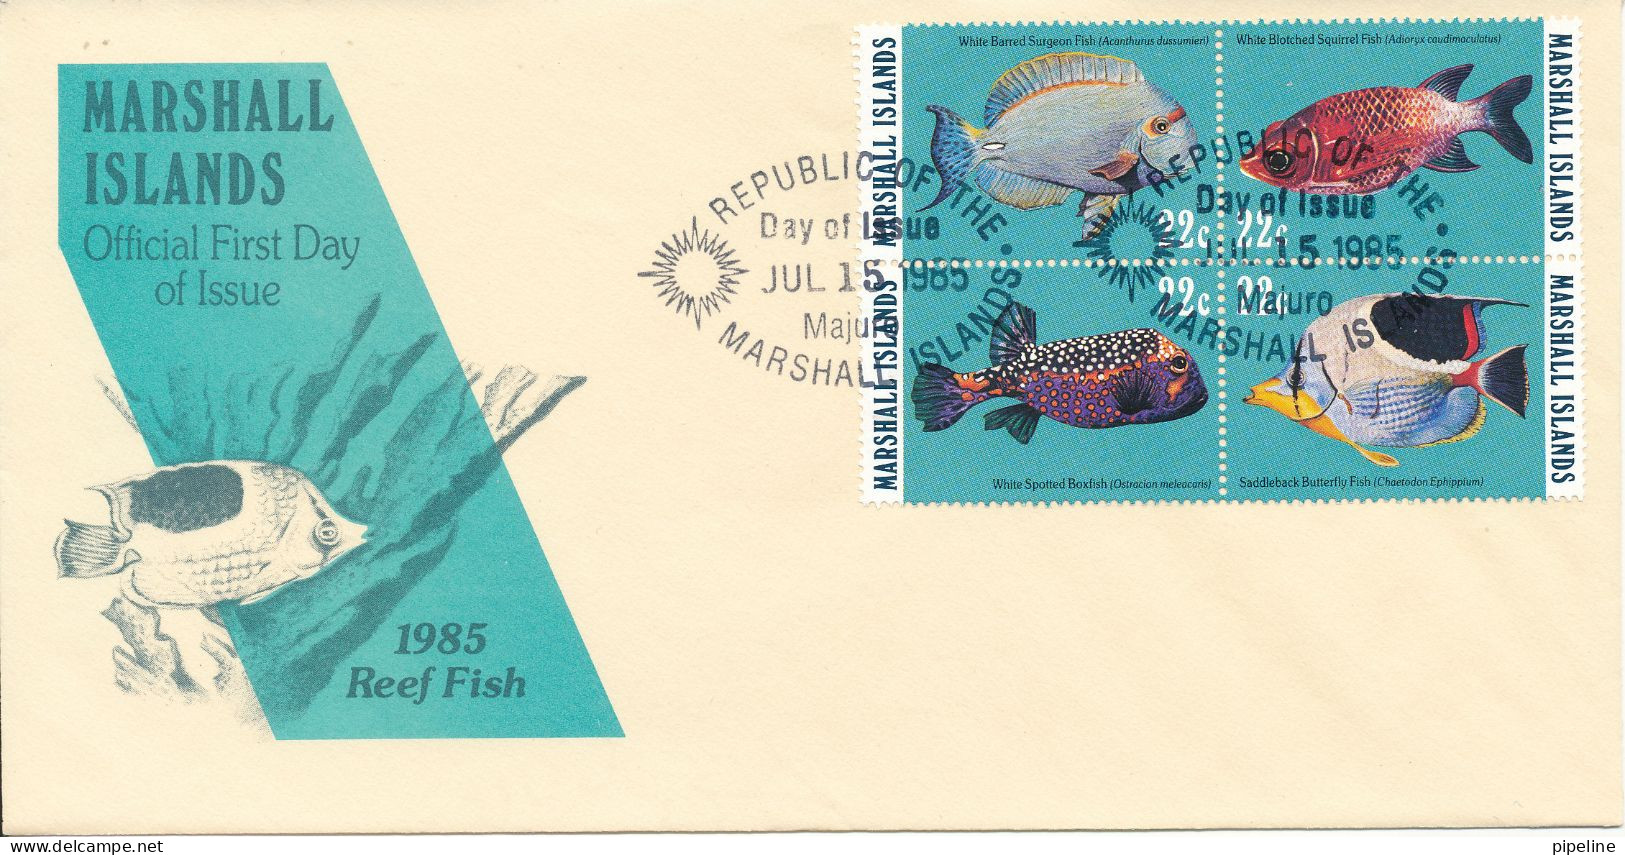 Marshall Islands FDC 15-7-1985 Complete Set Of 4 FISH With Cachet - Marshall Islands